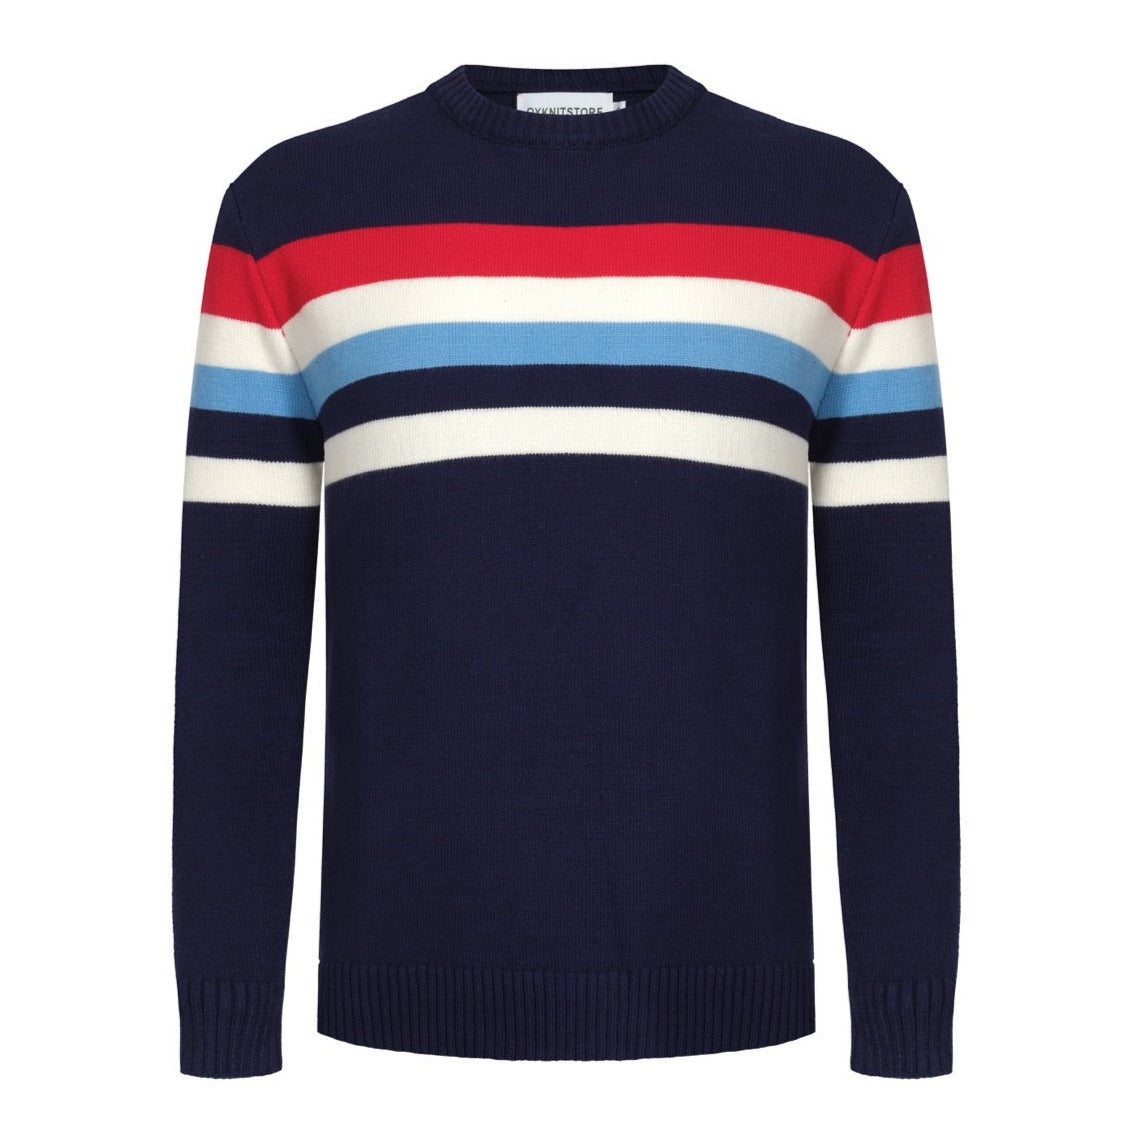 Men's Navy Blue Knitted Sweater With Chest Stripe Design